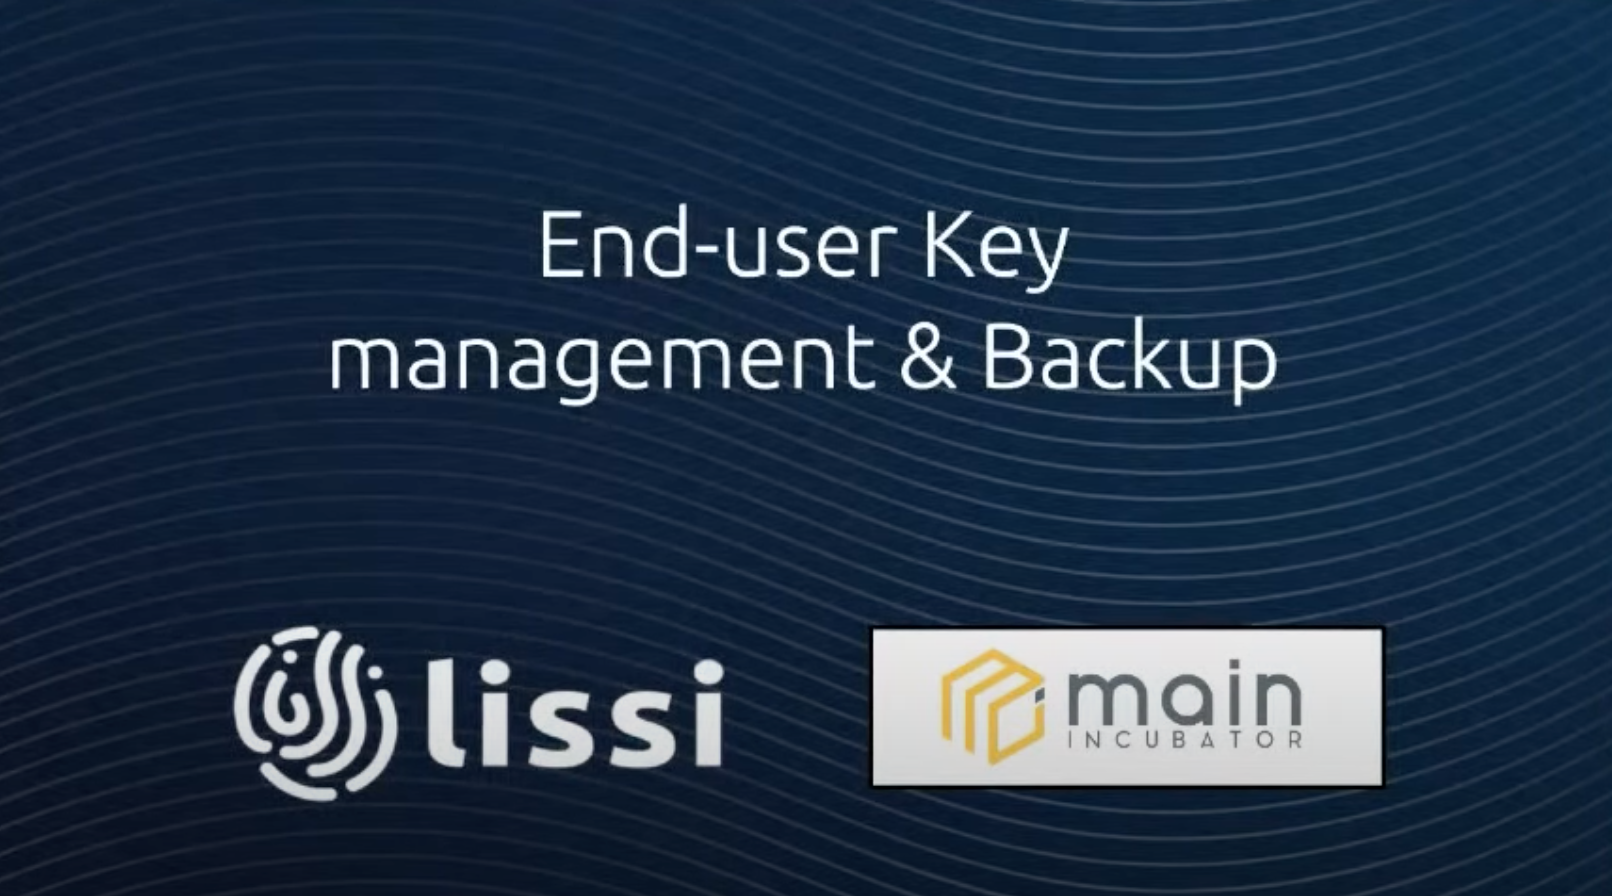 DIN Meeting with Lissi, End user key management